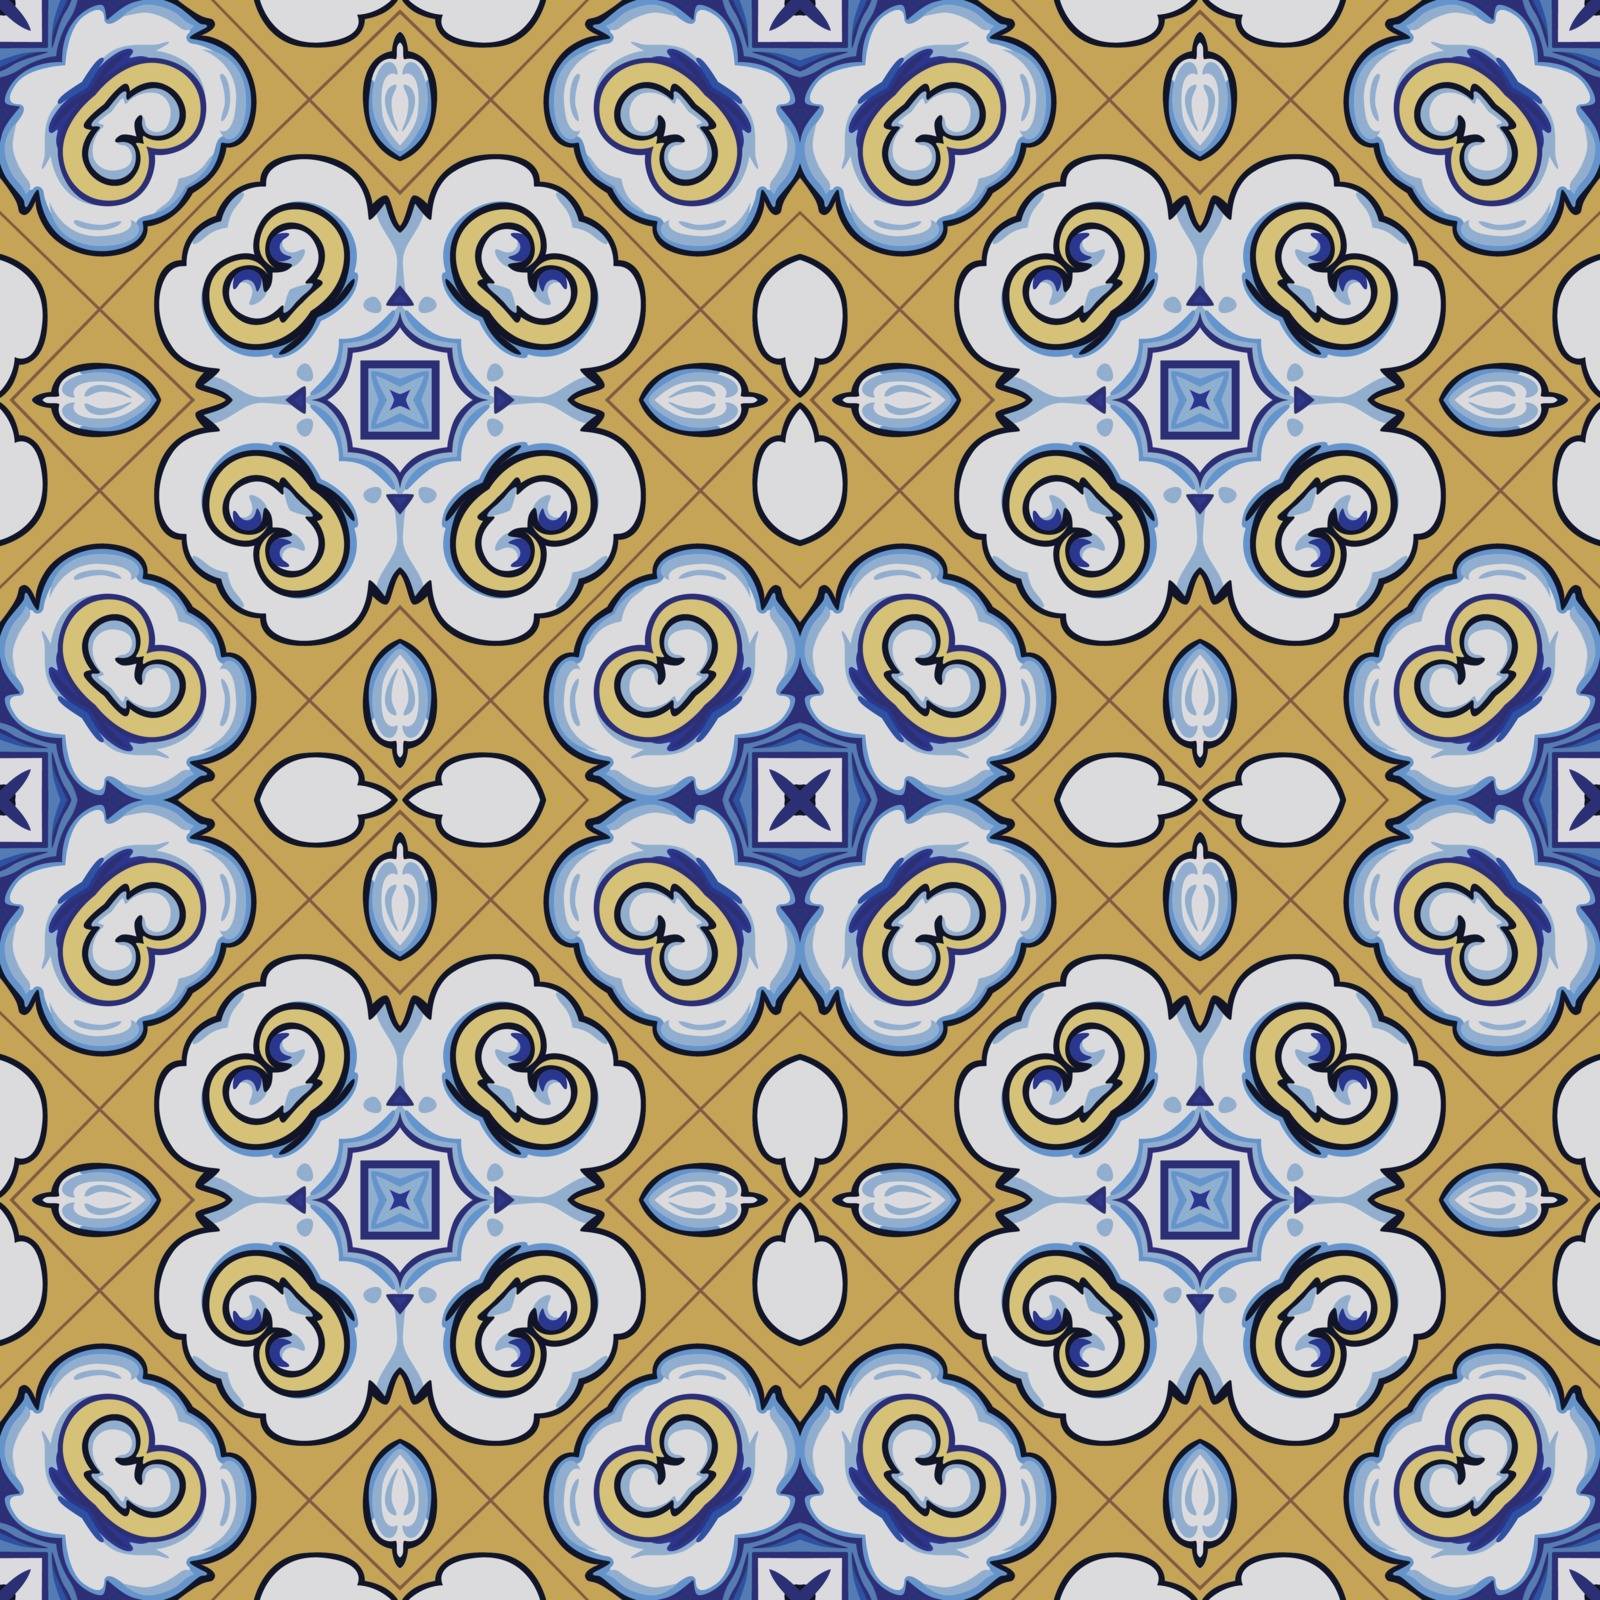 Seamless illustrated pattern made of abstract elements in beige, orange, blue and black